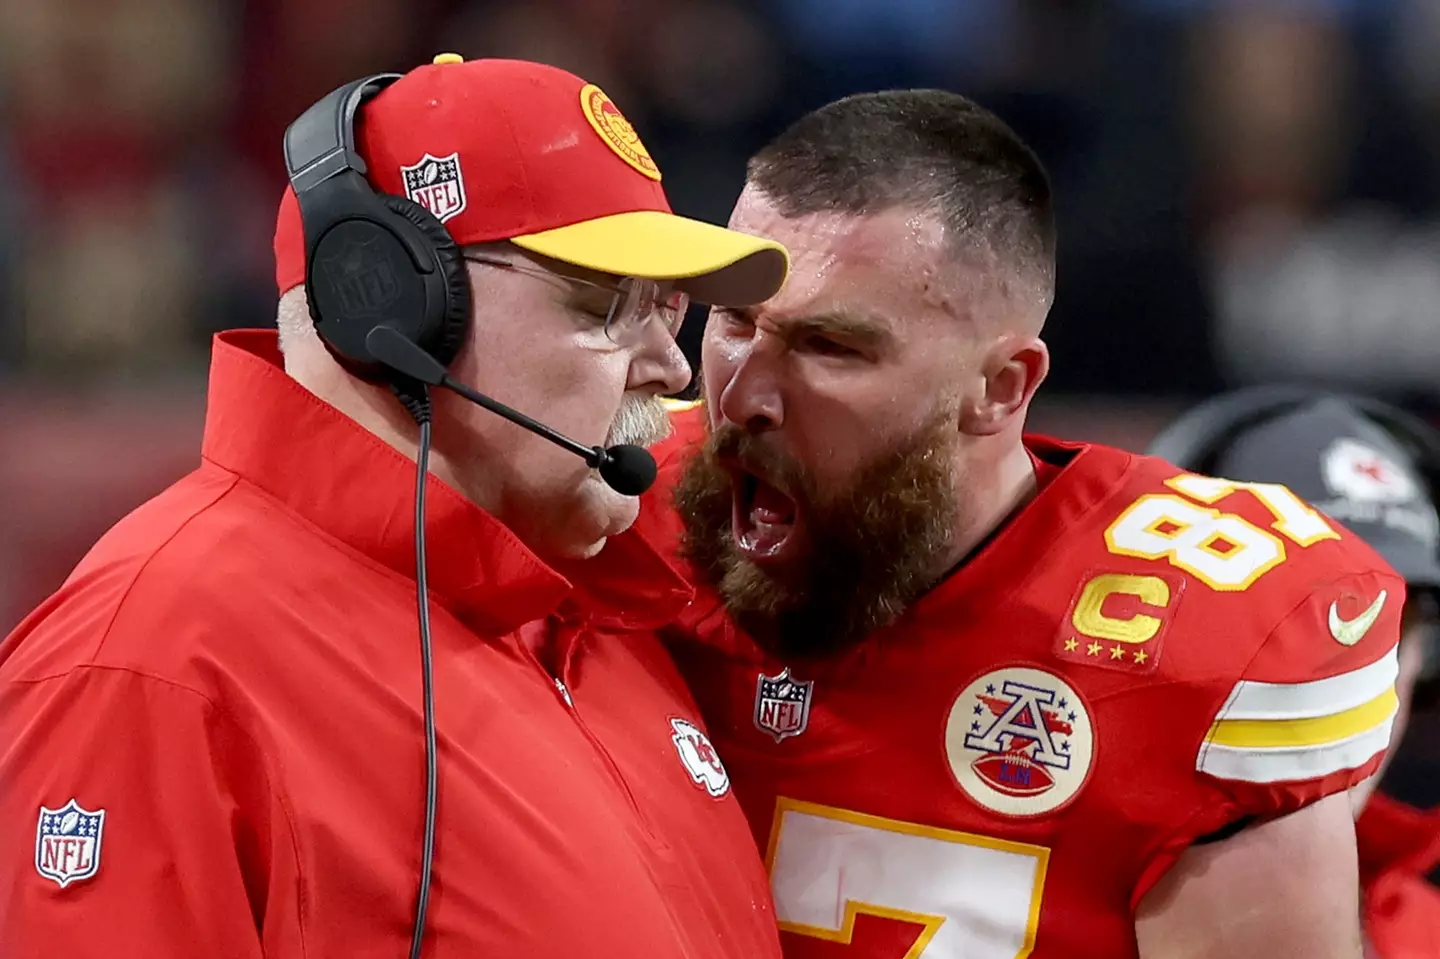 Tensions were running high, and Kelce was certainly one of the notable names losing his patience.